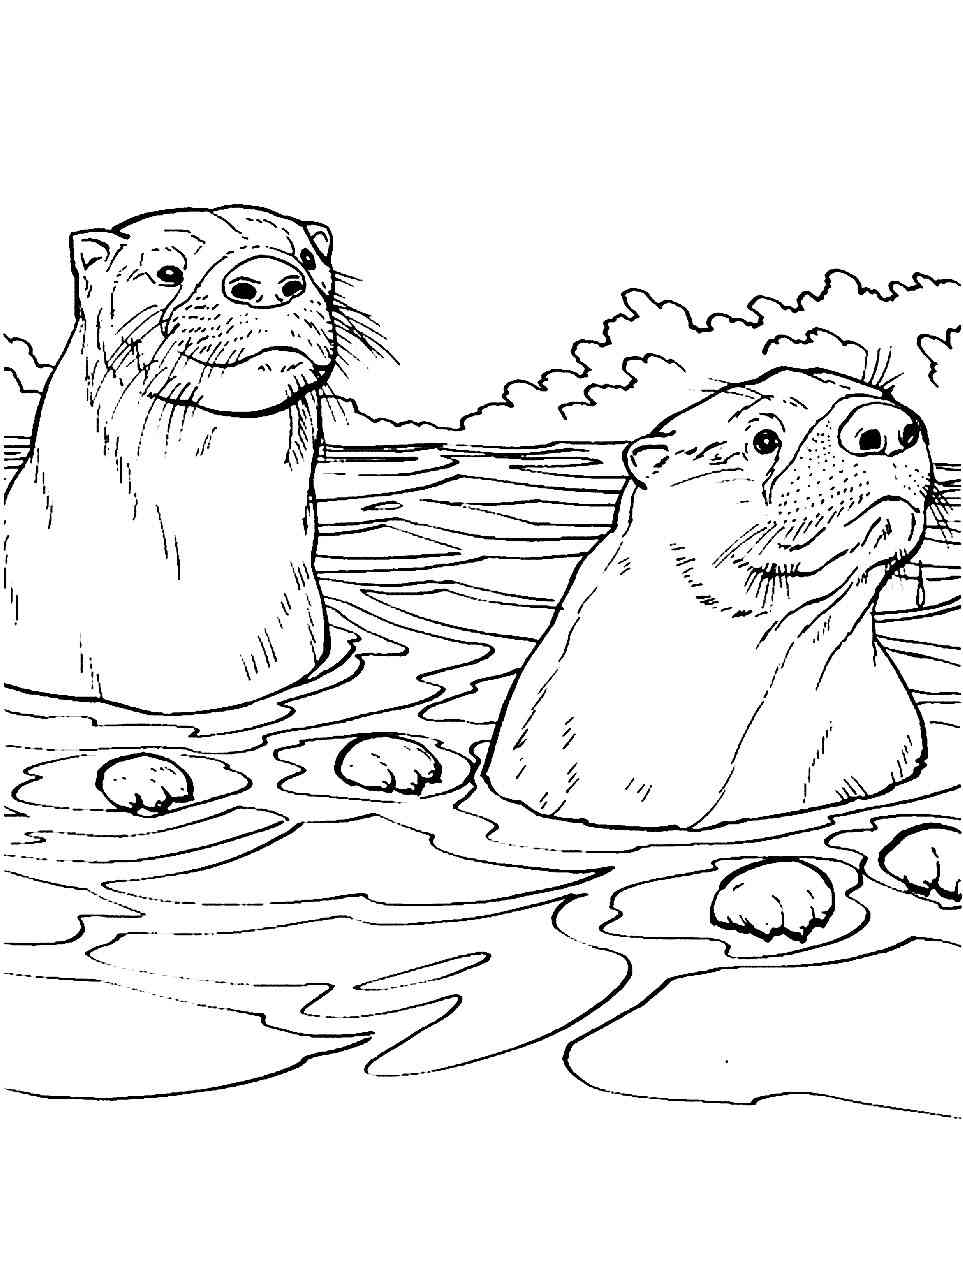 Two Otters in the River coloring page